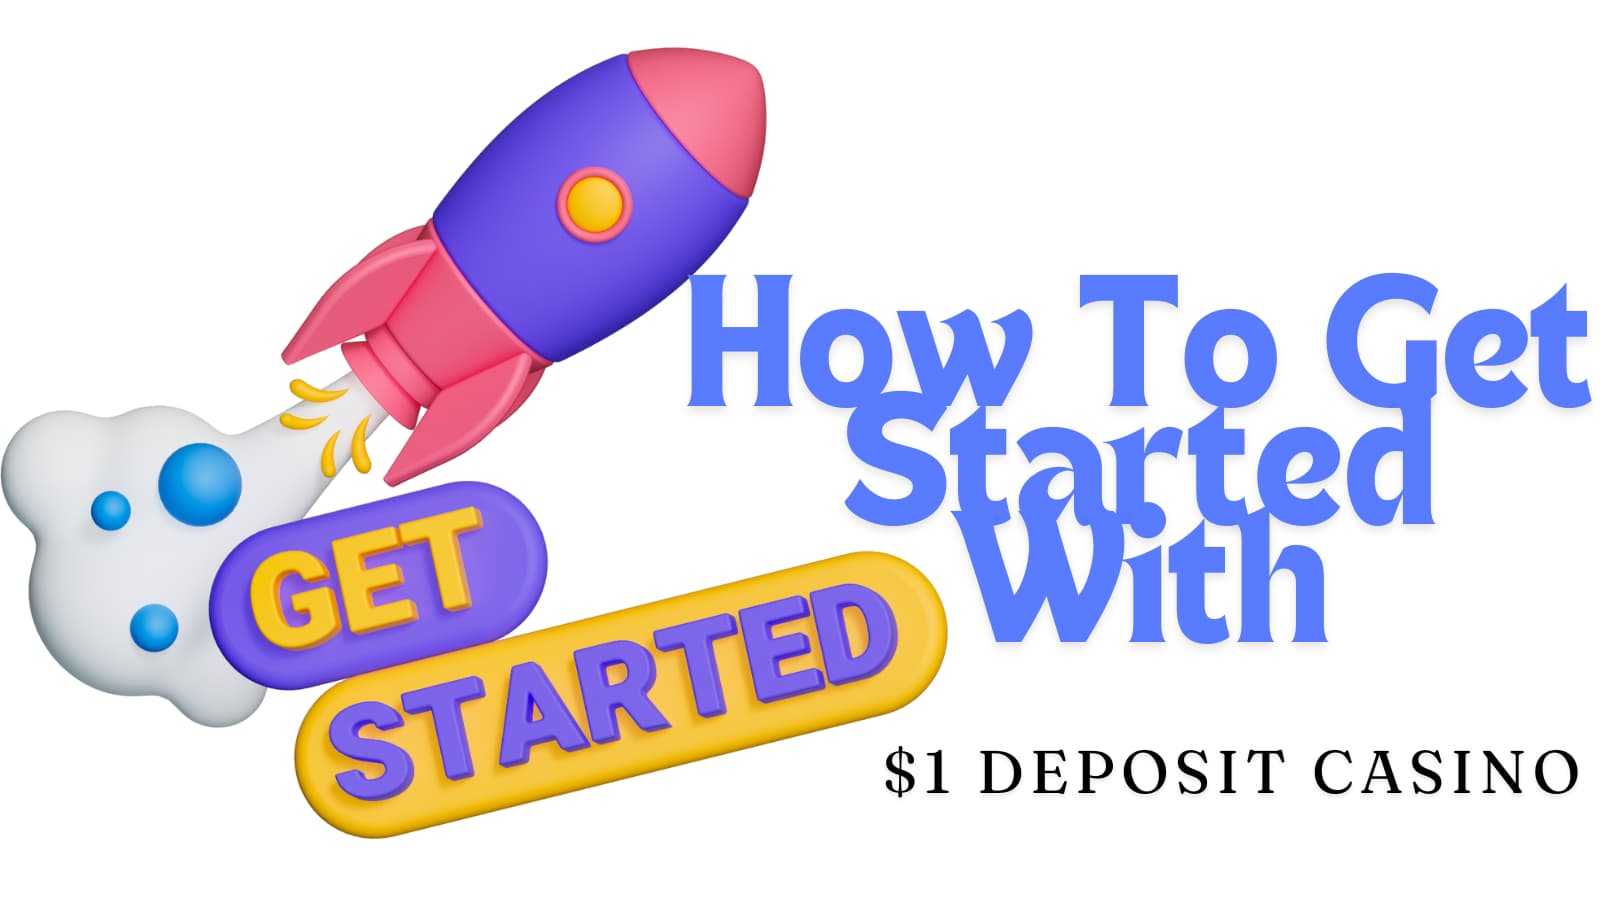 how to get started with $1 deposit casino